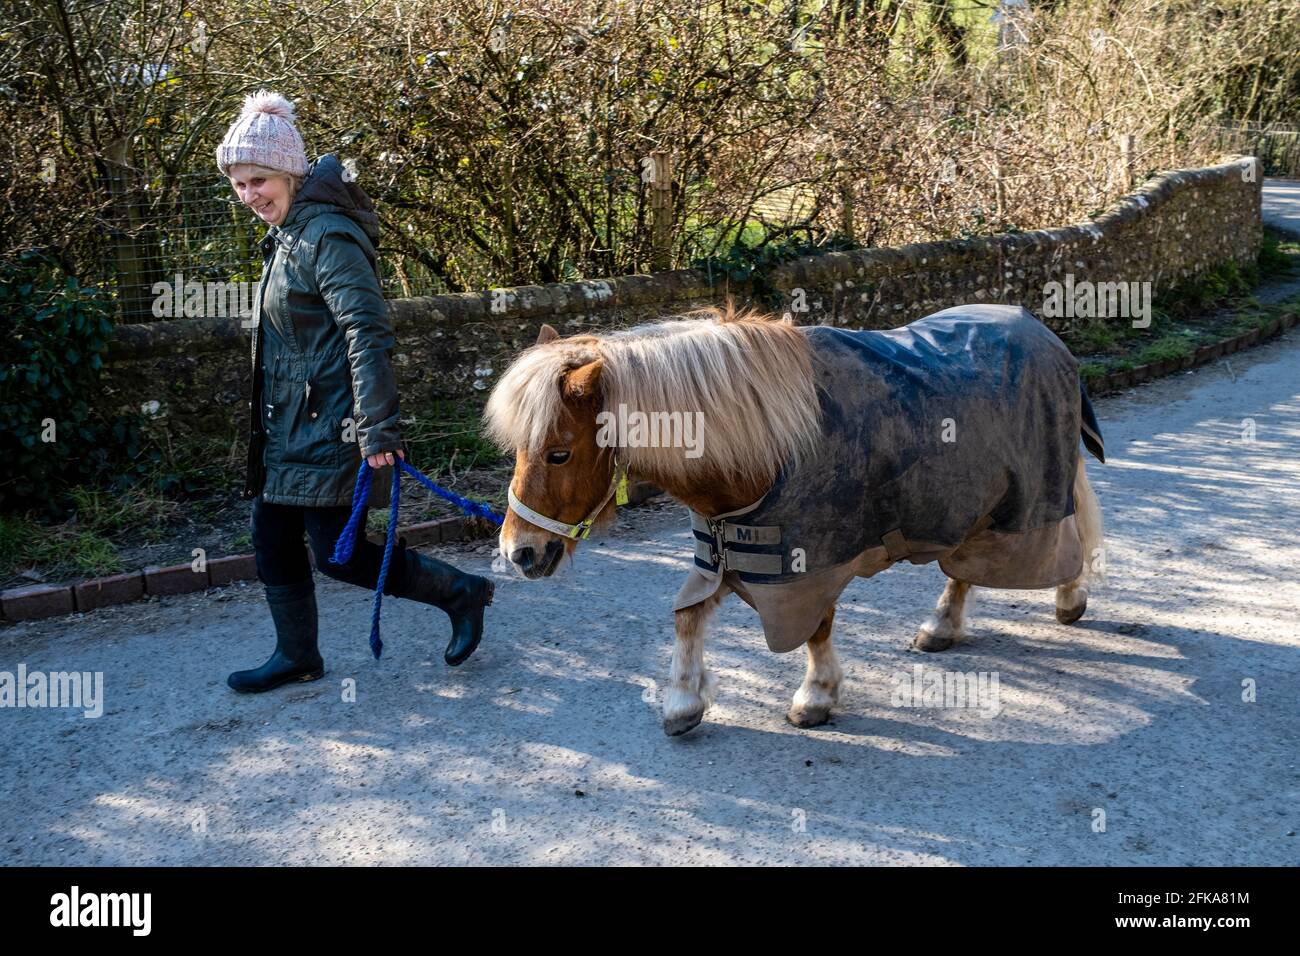 A Local Woman Leading A Pony (Rural Life), Stanmer, East Sussex, Uk. Stock Photo